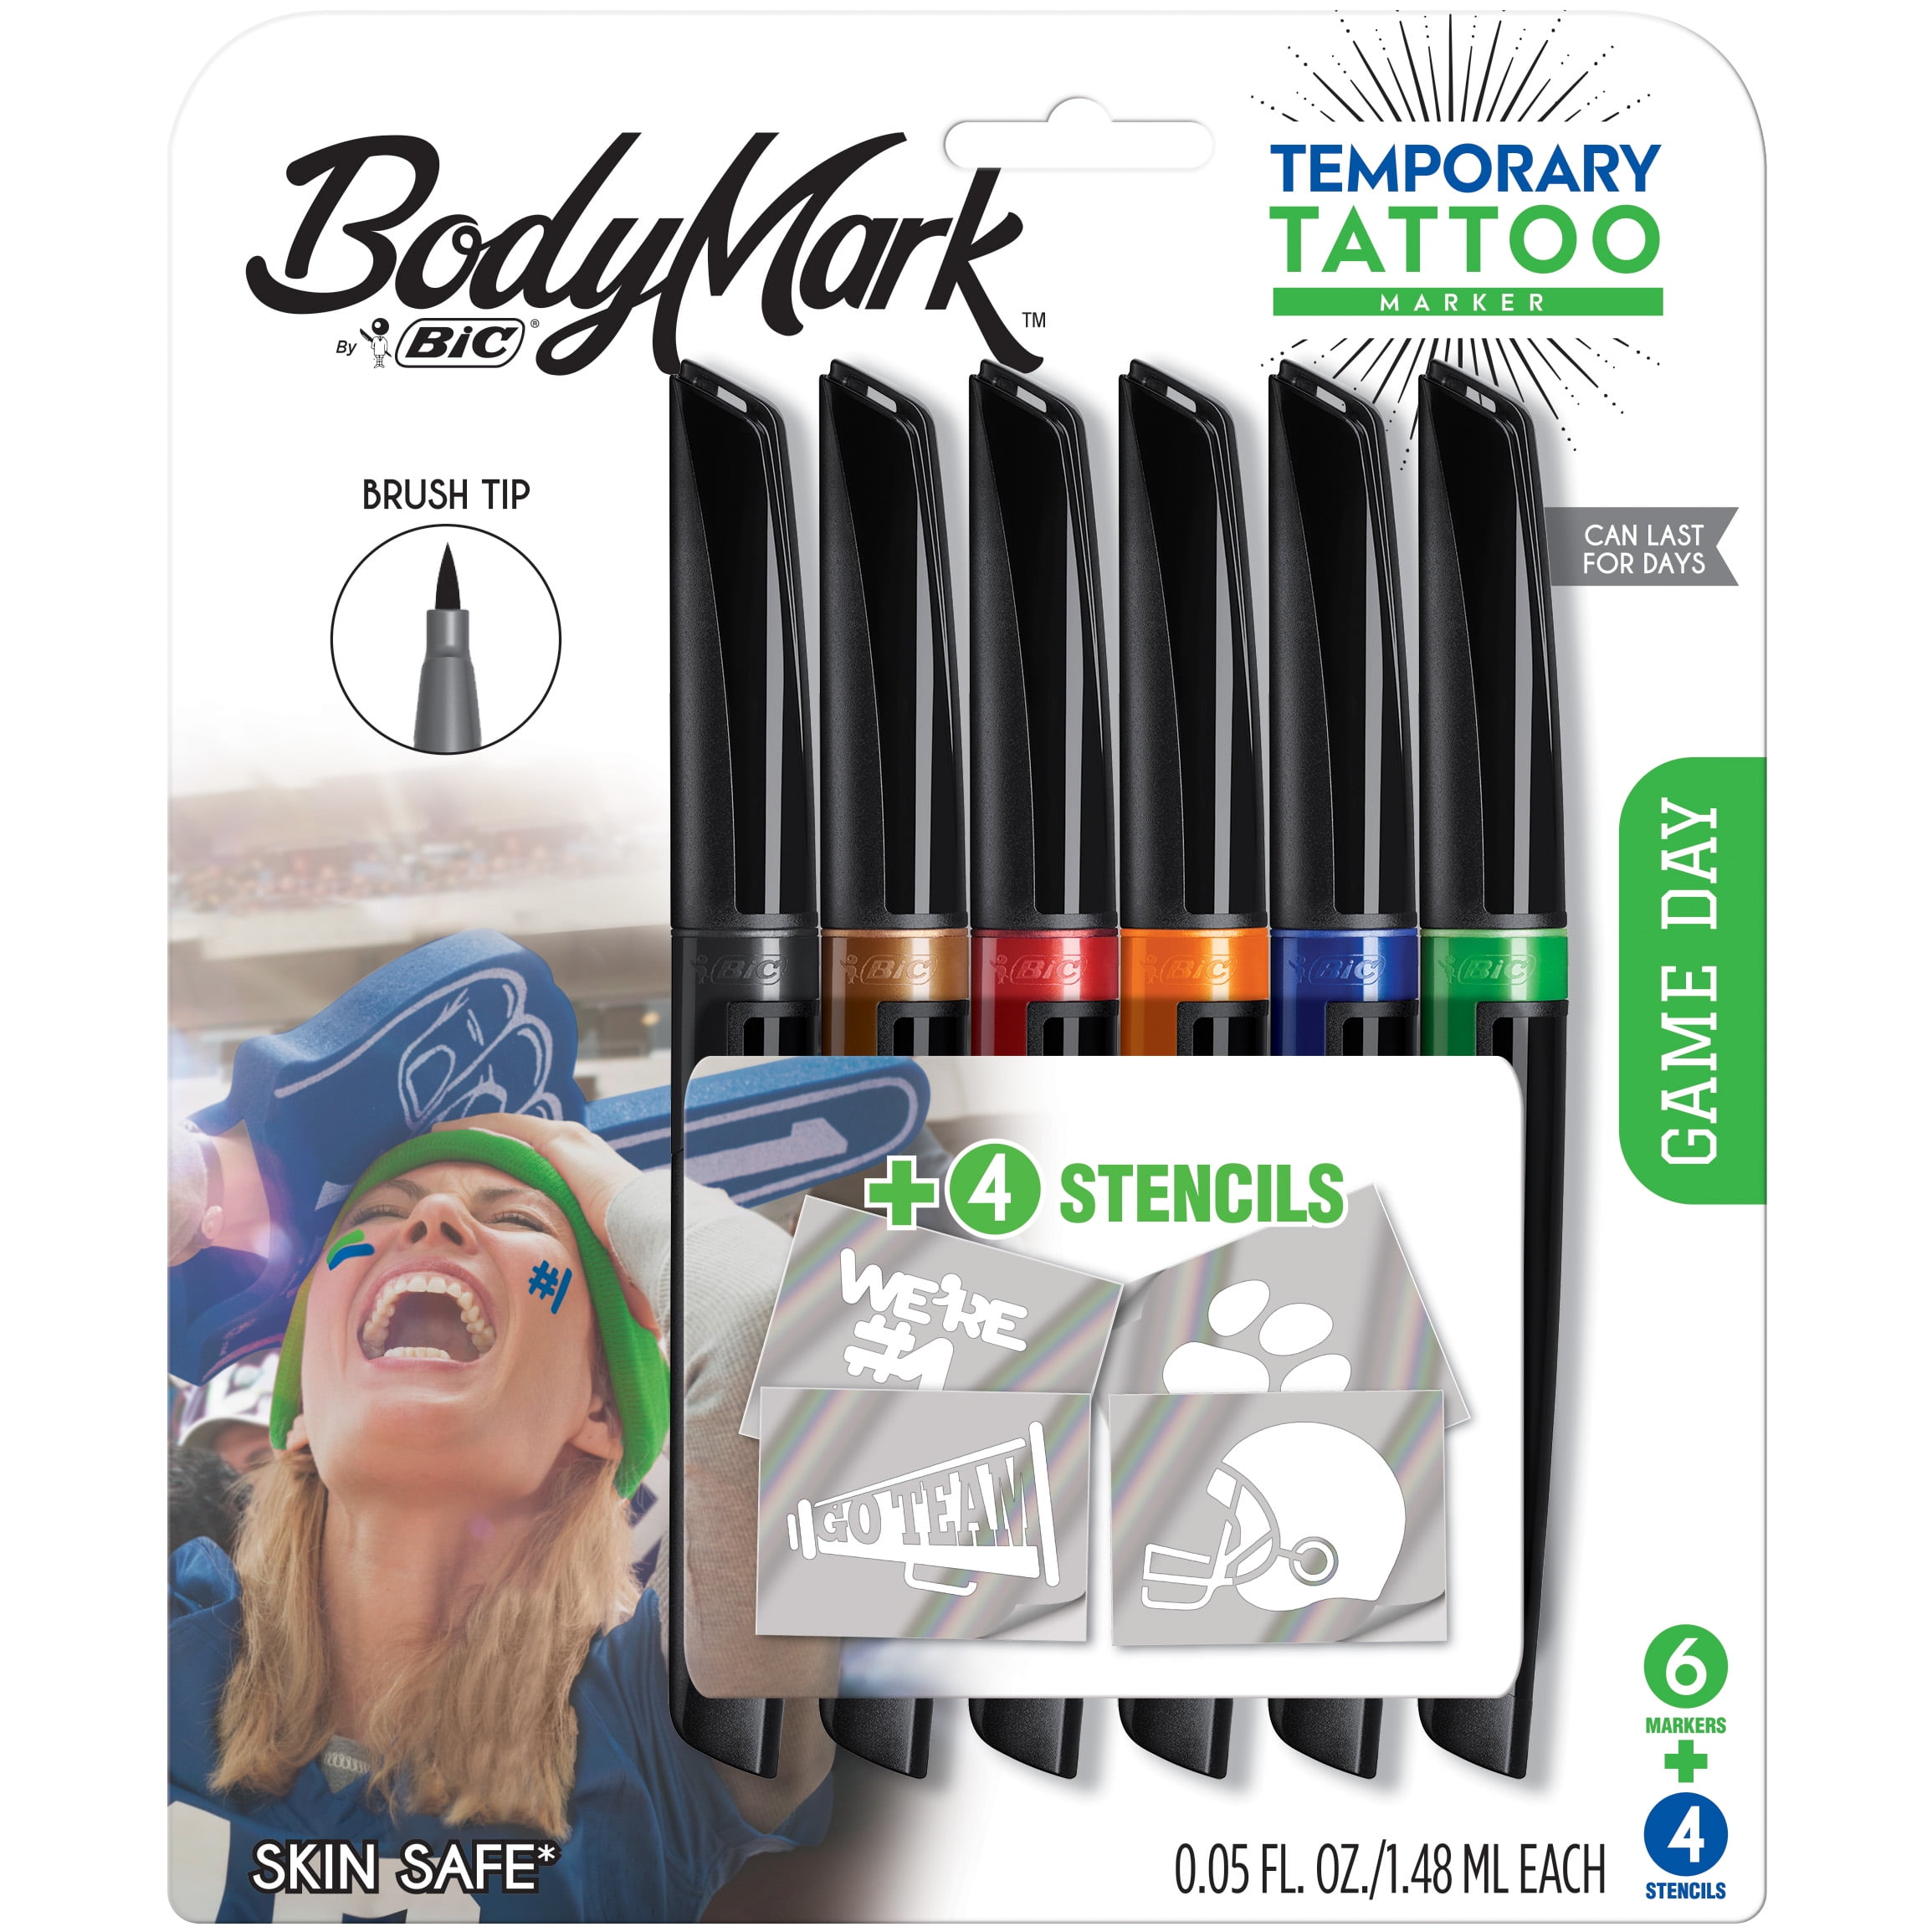 BIC Body Mark Temporary Tattoo Art Markers with Brush Tip, Game Day  Edition, Assorted Colors, Pack of 6 Markers + 4 Tattoo Stencils Included 